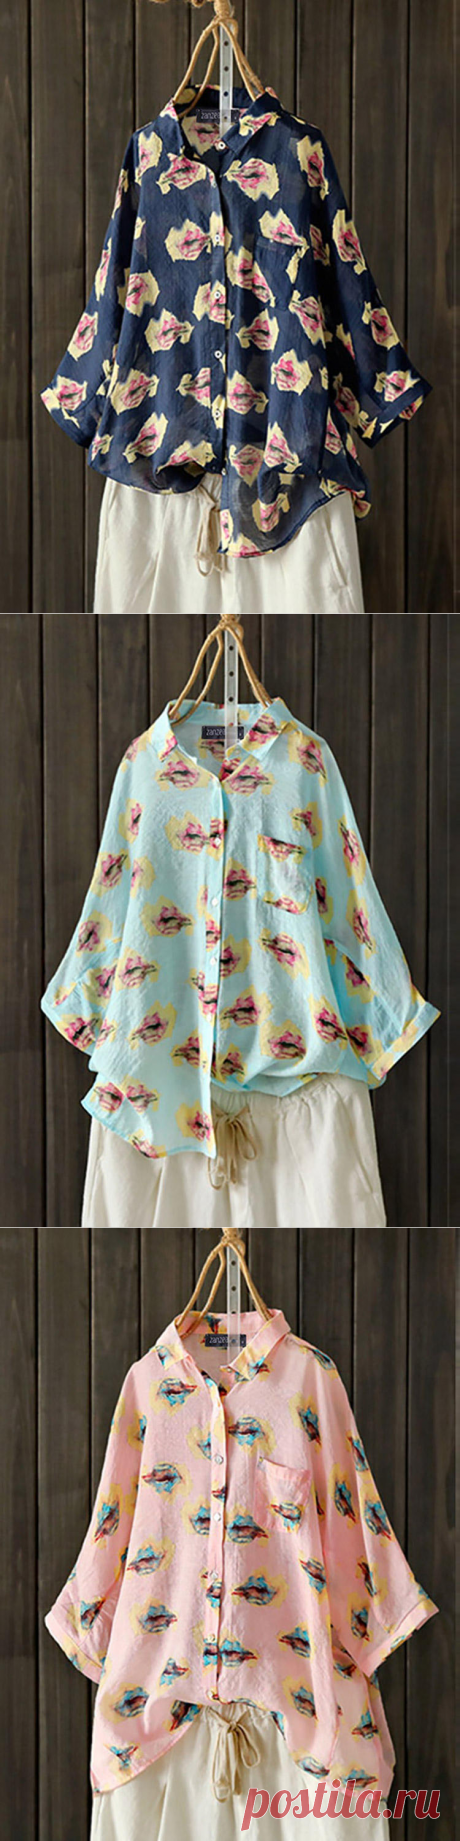 women floral printed buttons 3/4 sleeve t-shirts